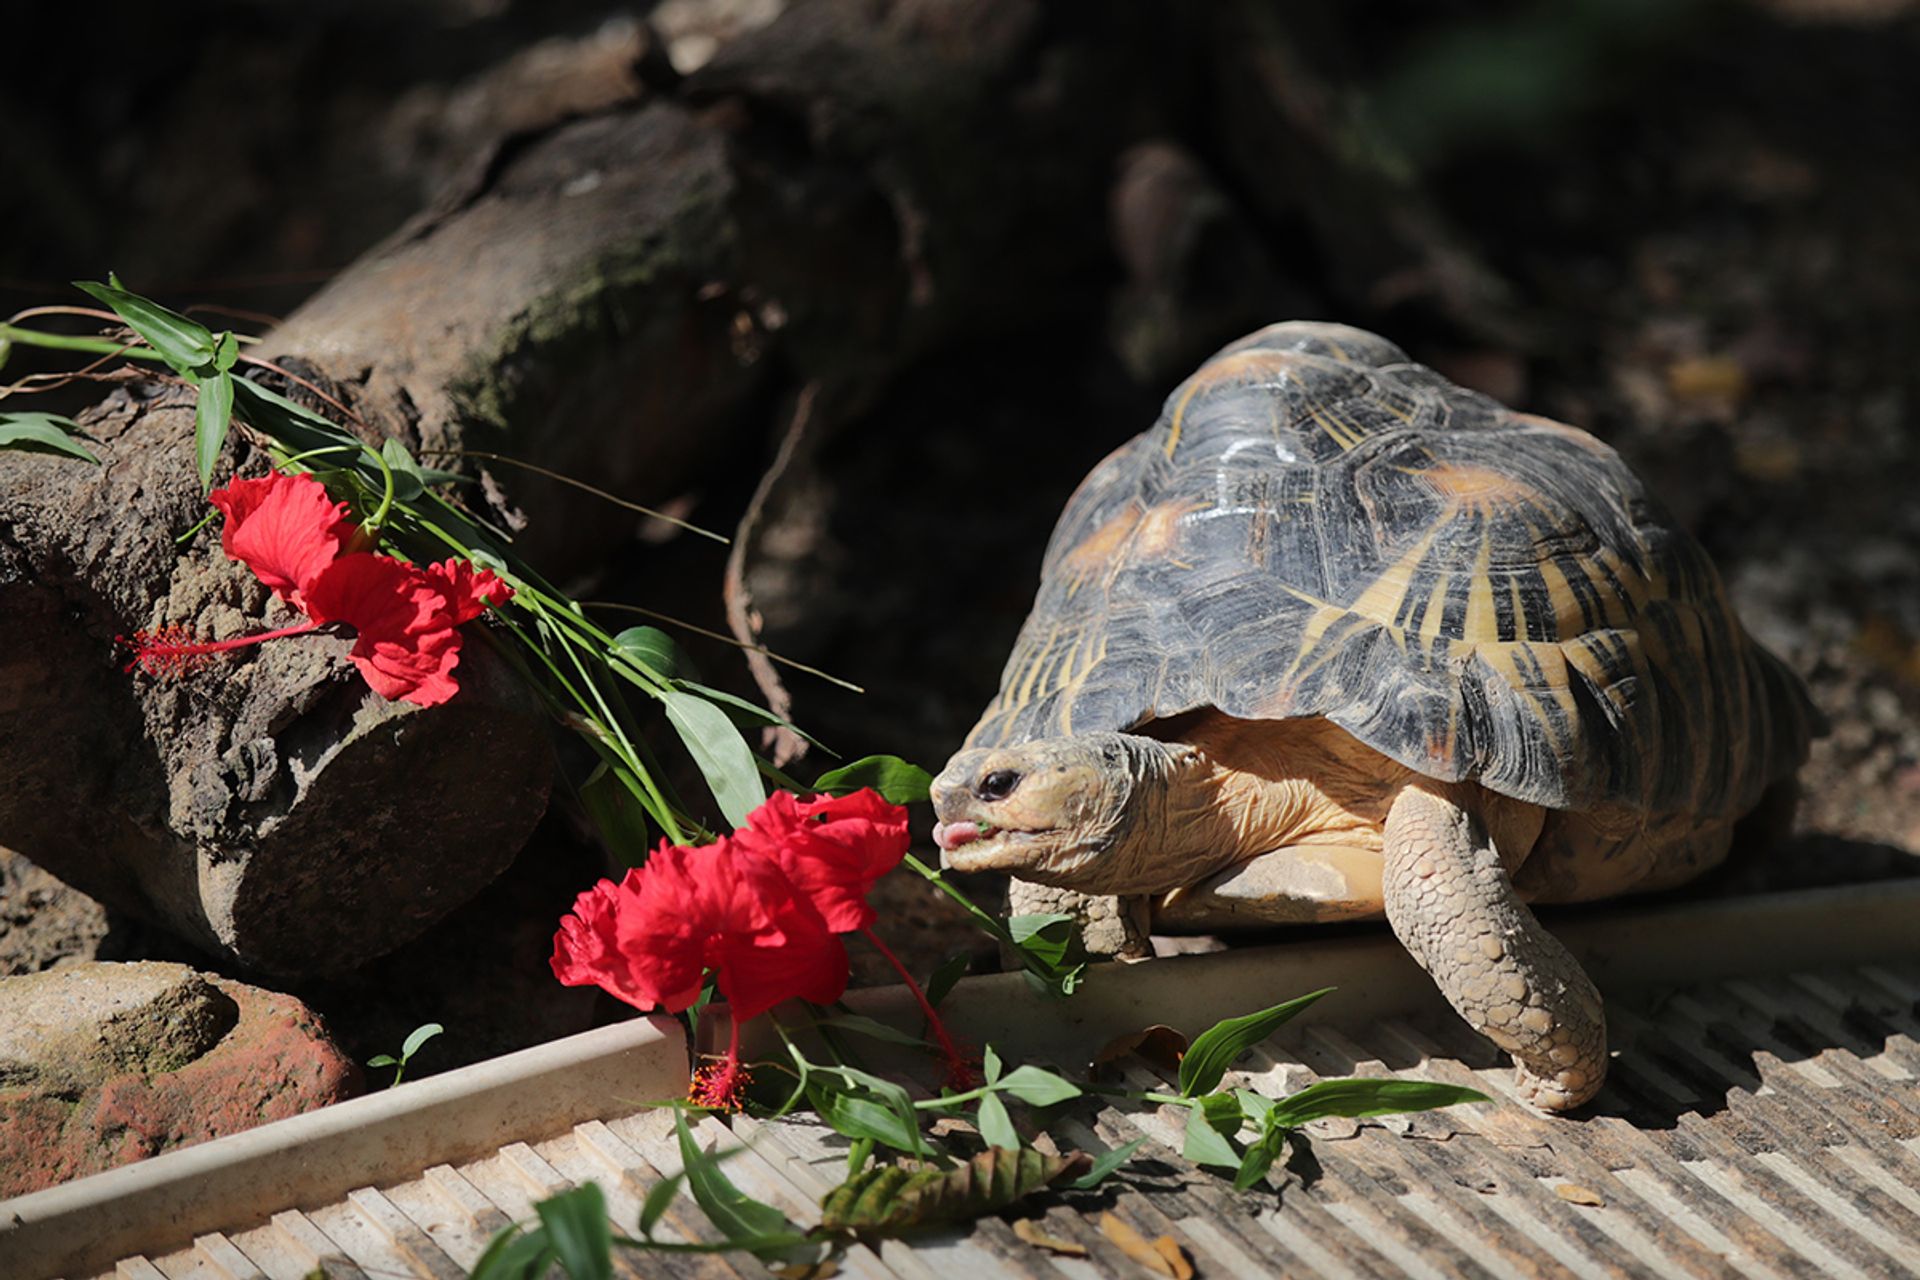 Jerry the radiated tortoise from Madagascar feeding on hibiscus. ST PHOTO: GIN TAY